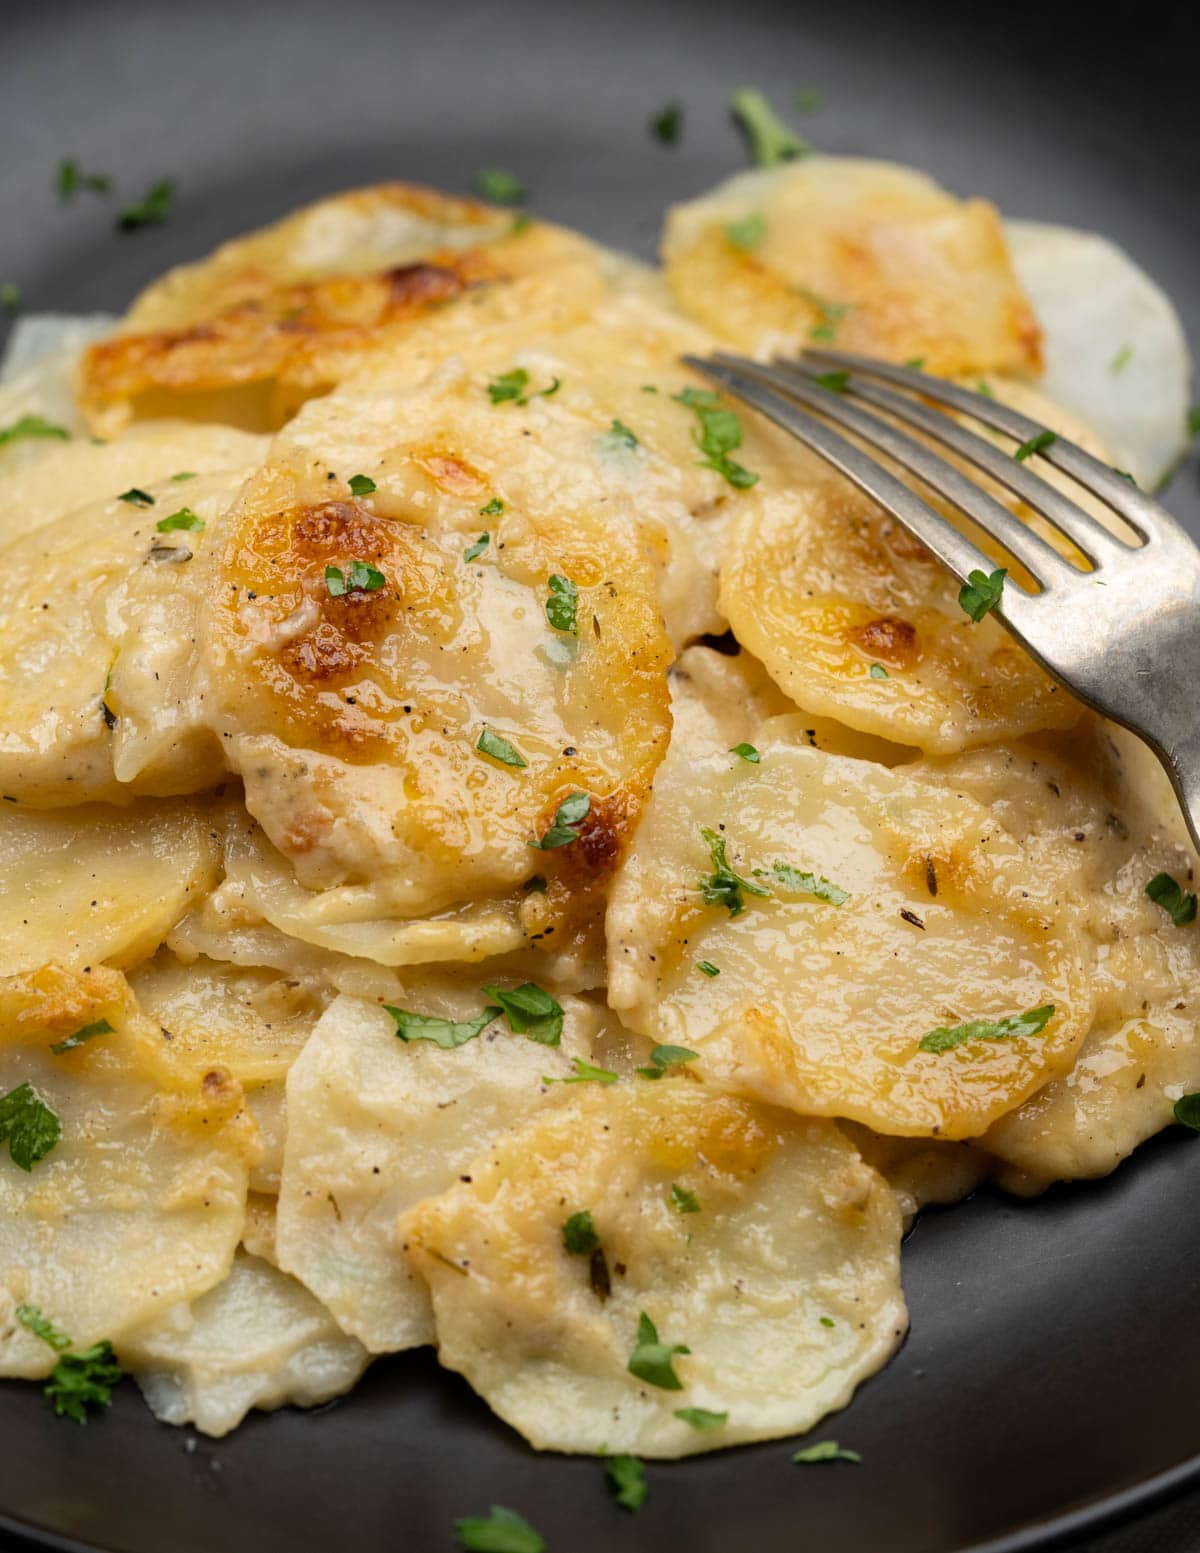 Tender potato slices coated with a creamy sauce served on a black plate and fork and topped with a few slices that have developed a nice crust.